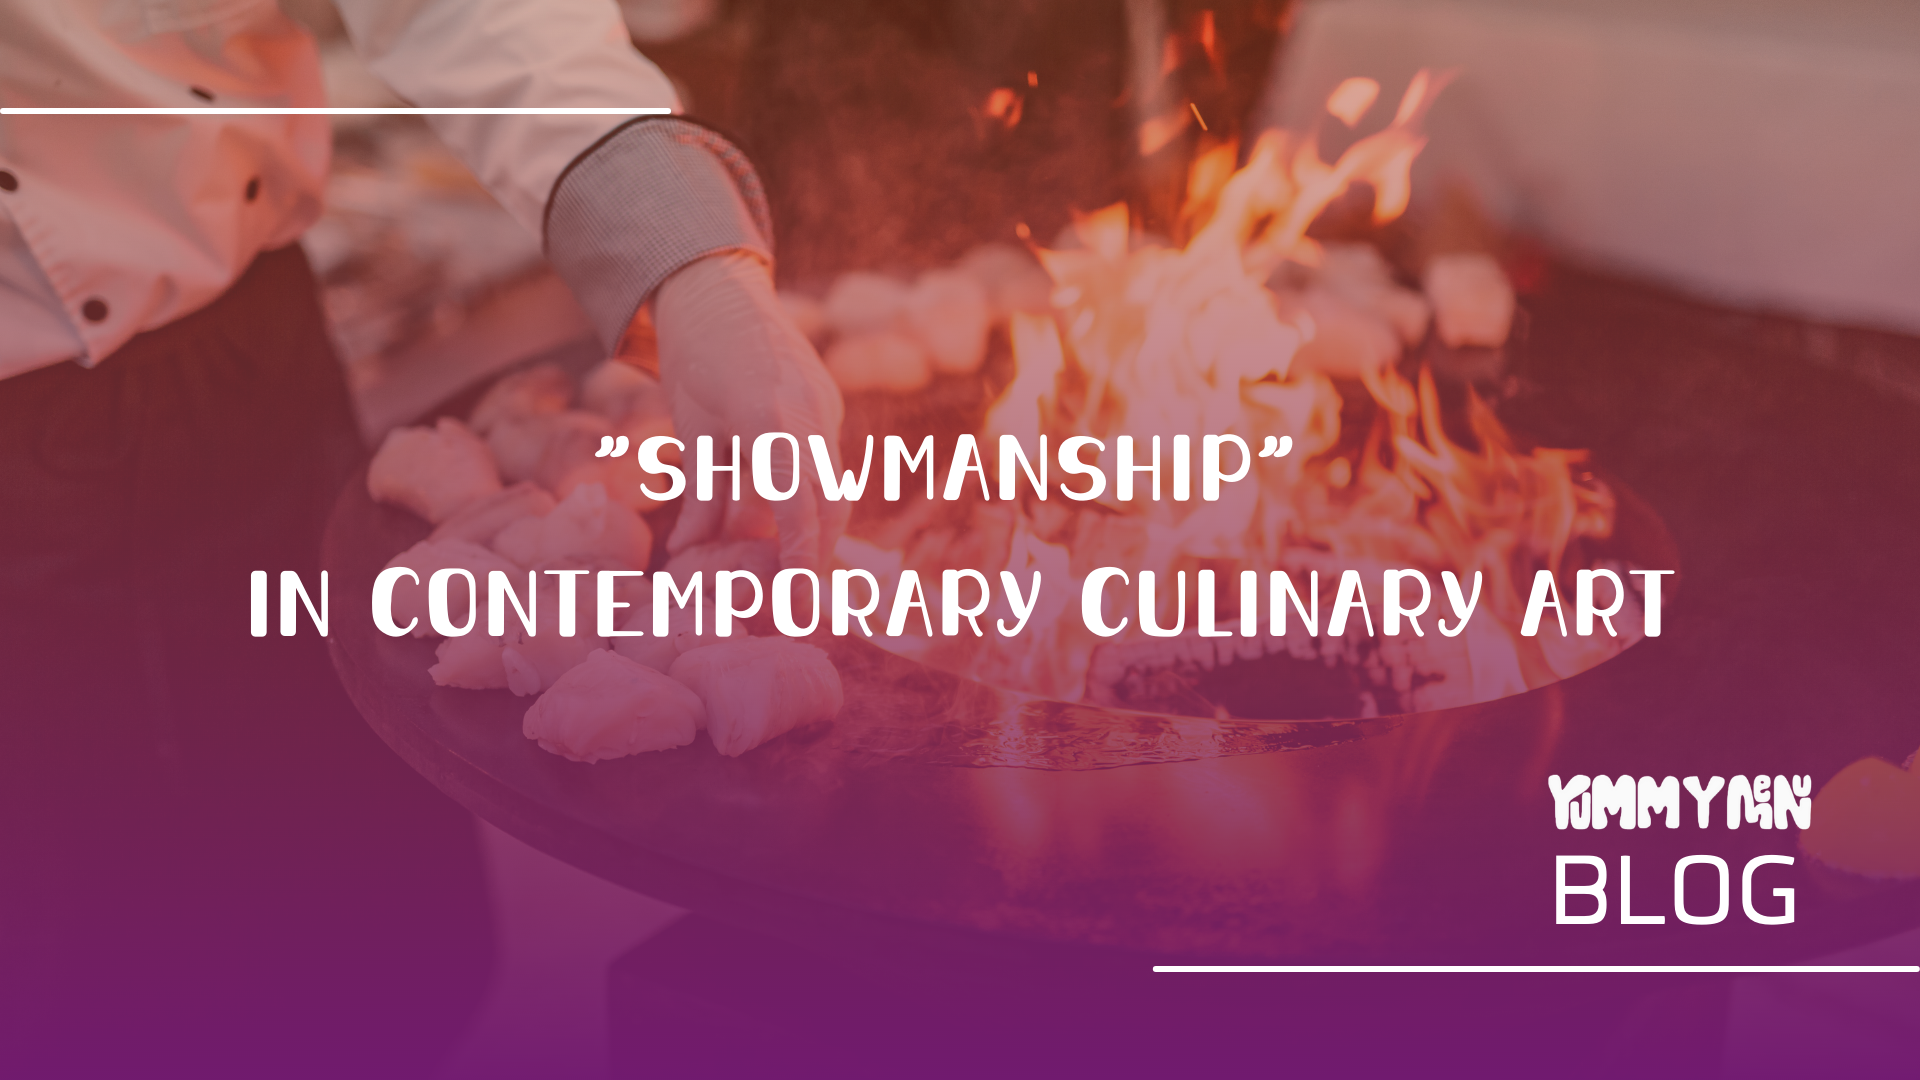 "Showmanship" in Contemporary Culinary Art